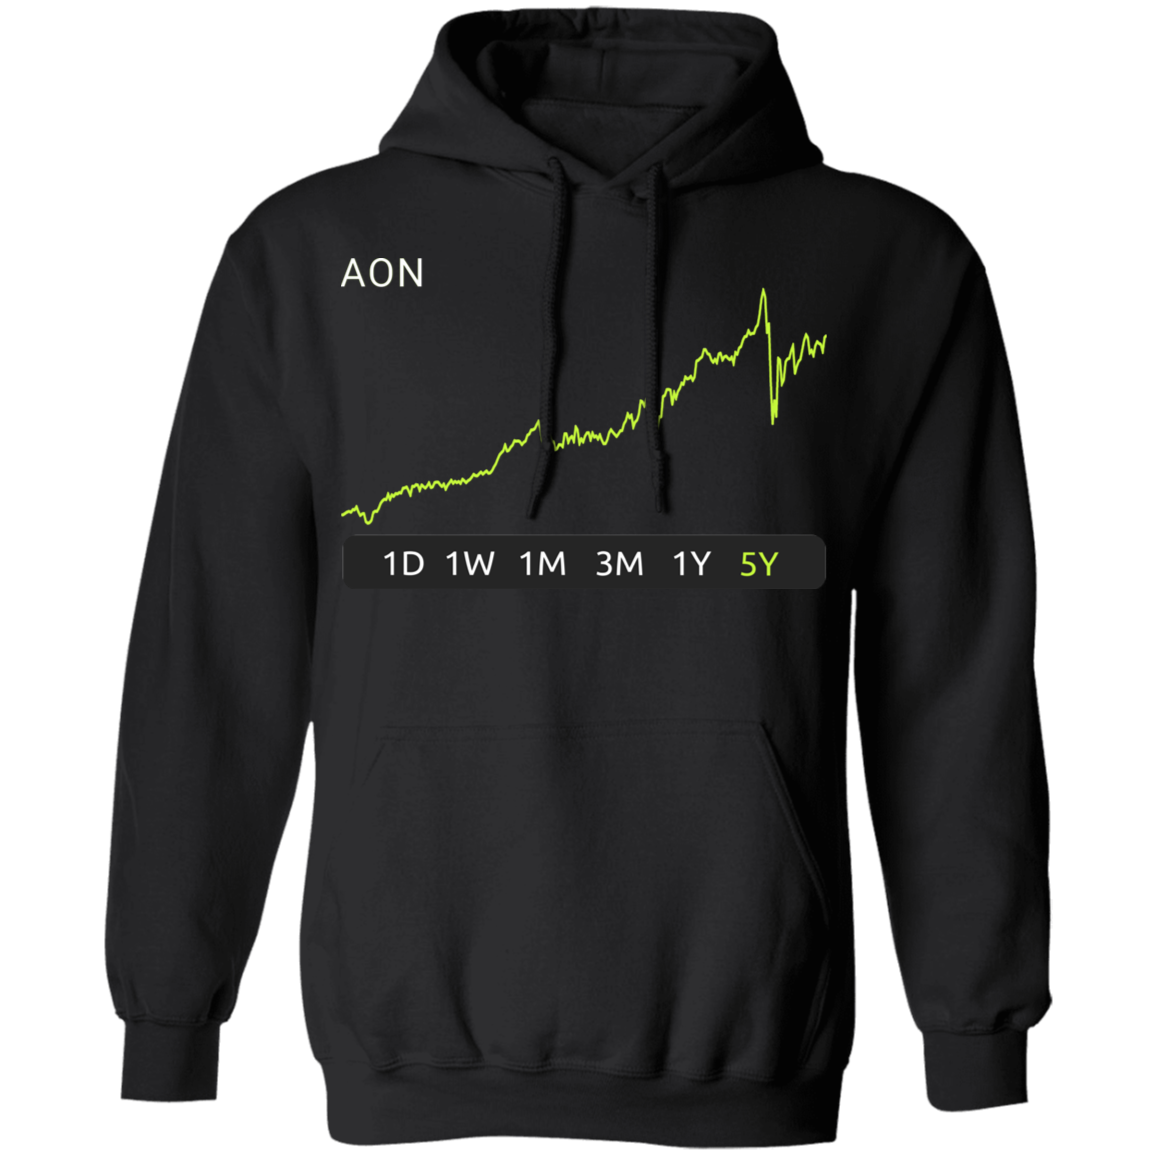 AON Stock 5y Pullover Hoodie